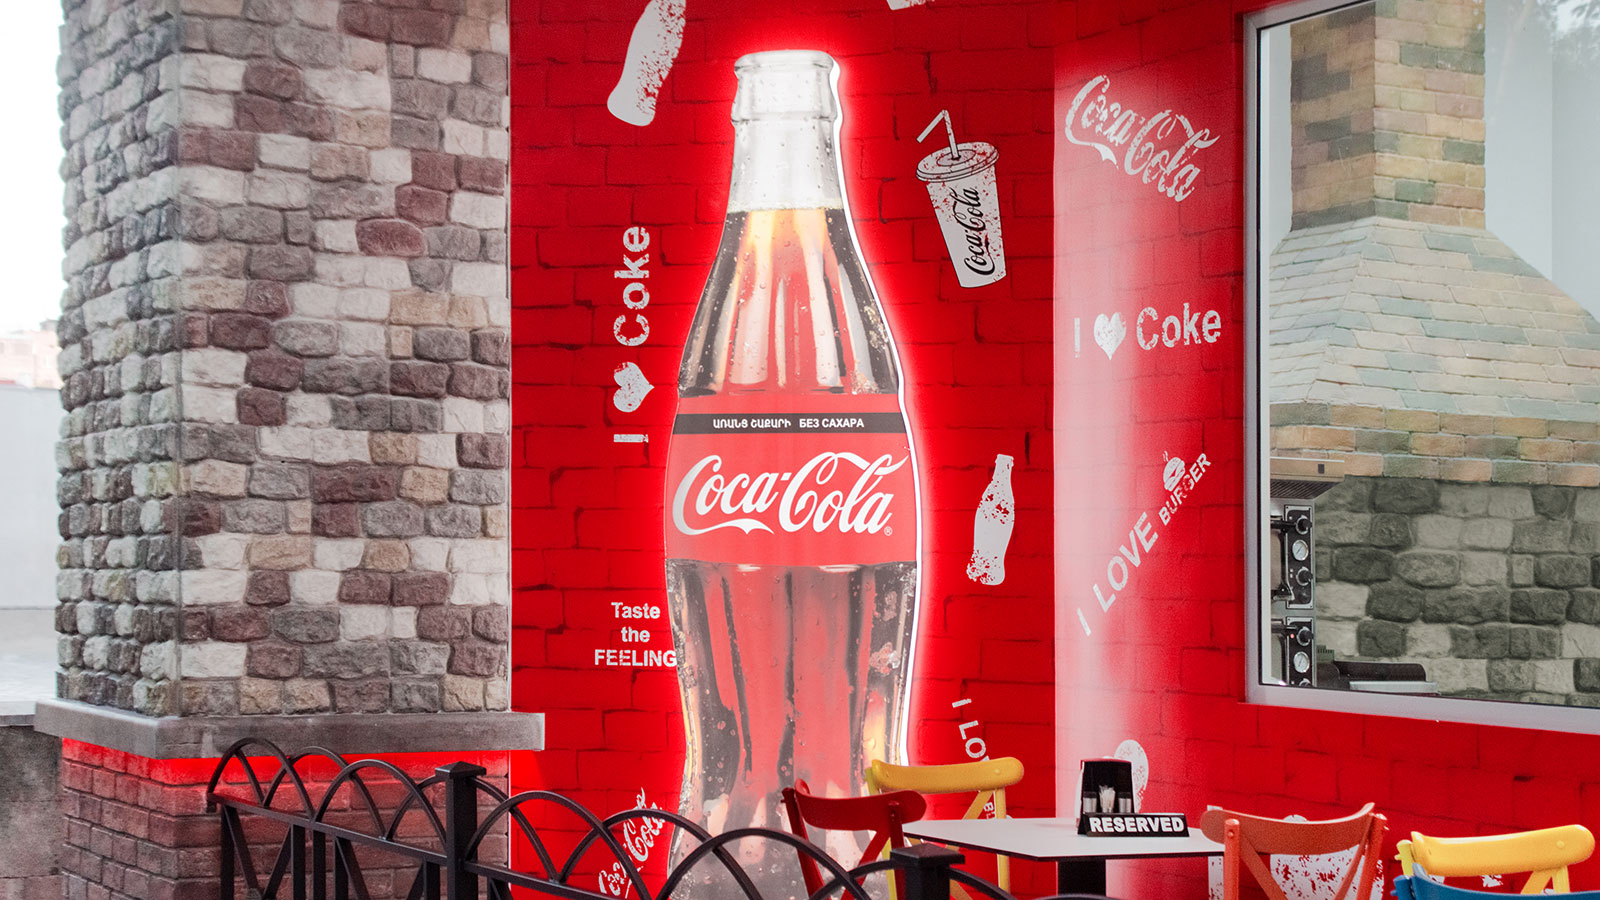 Coca-Cola custom light box in the shape of the branded bottle made of acrylic for branding